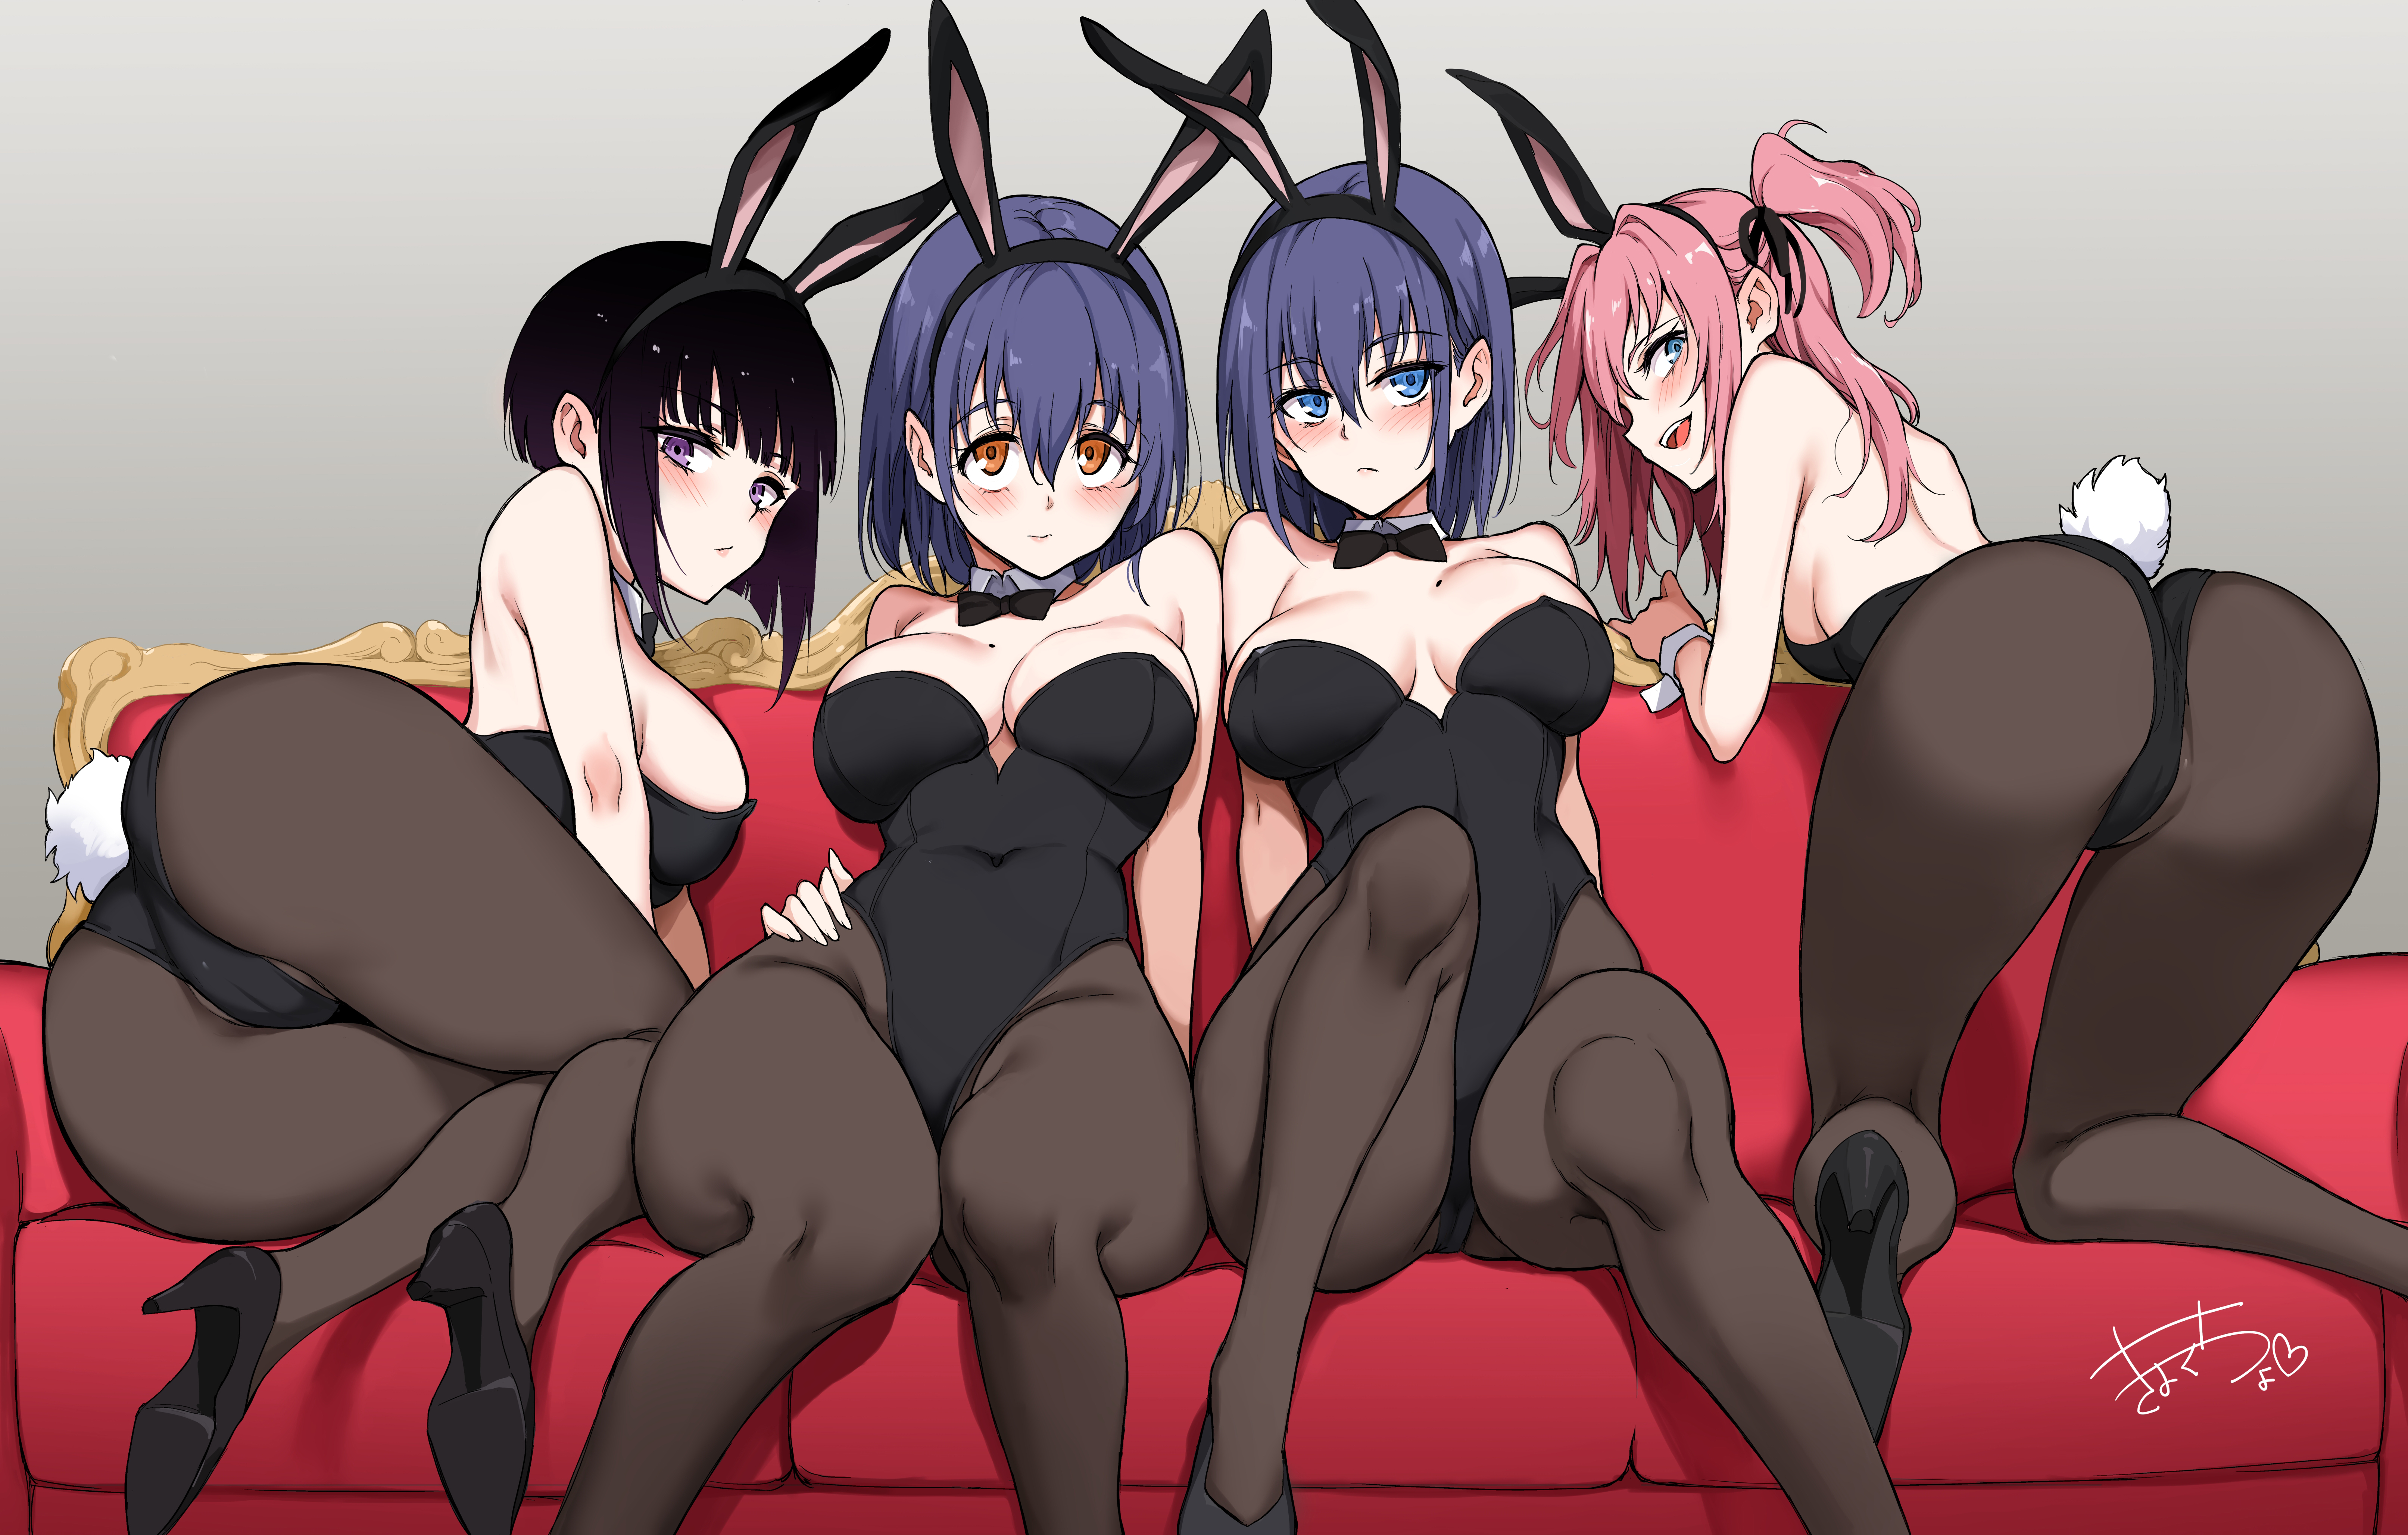 Anime 6452x4112 Kaede to Suzu Lovely Aina-chan Lovely (Hentai) anime anime girls 2D drawing fan art Kyokucho bunny girl bunny suit ass bunny ears pantyhose miyabi-senpai crossover line-up bent over blushing looking at viewer bow tie heels